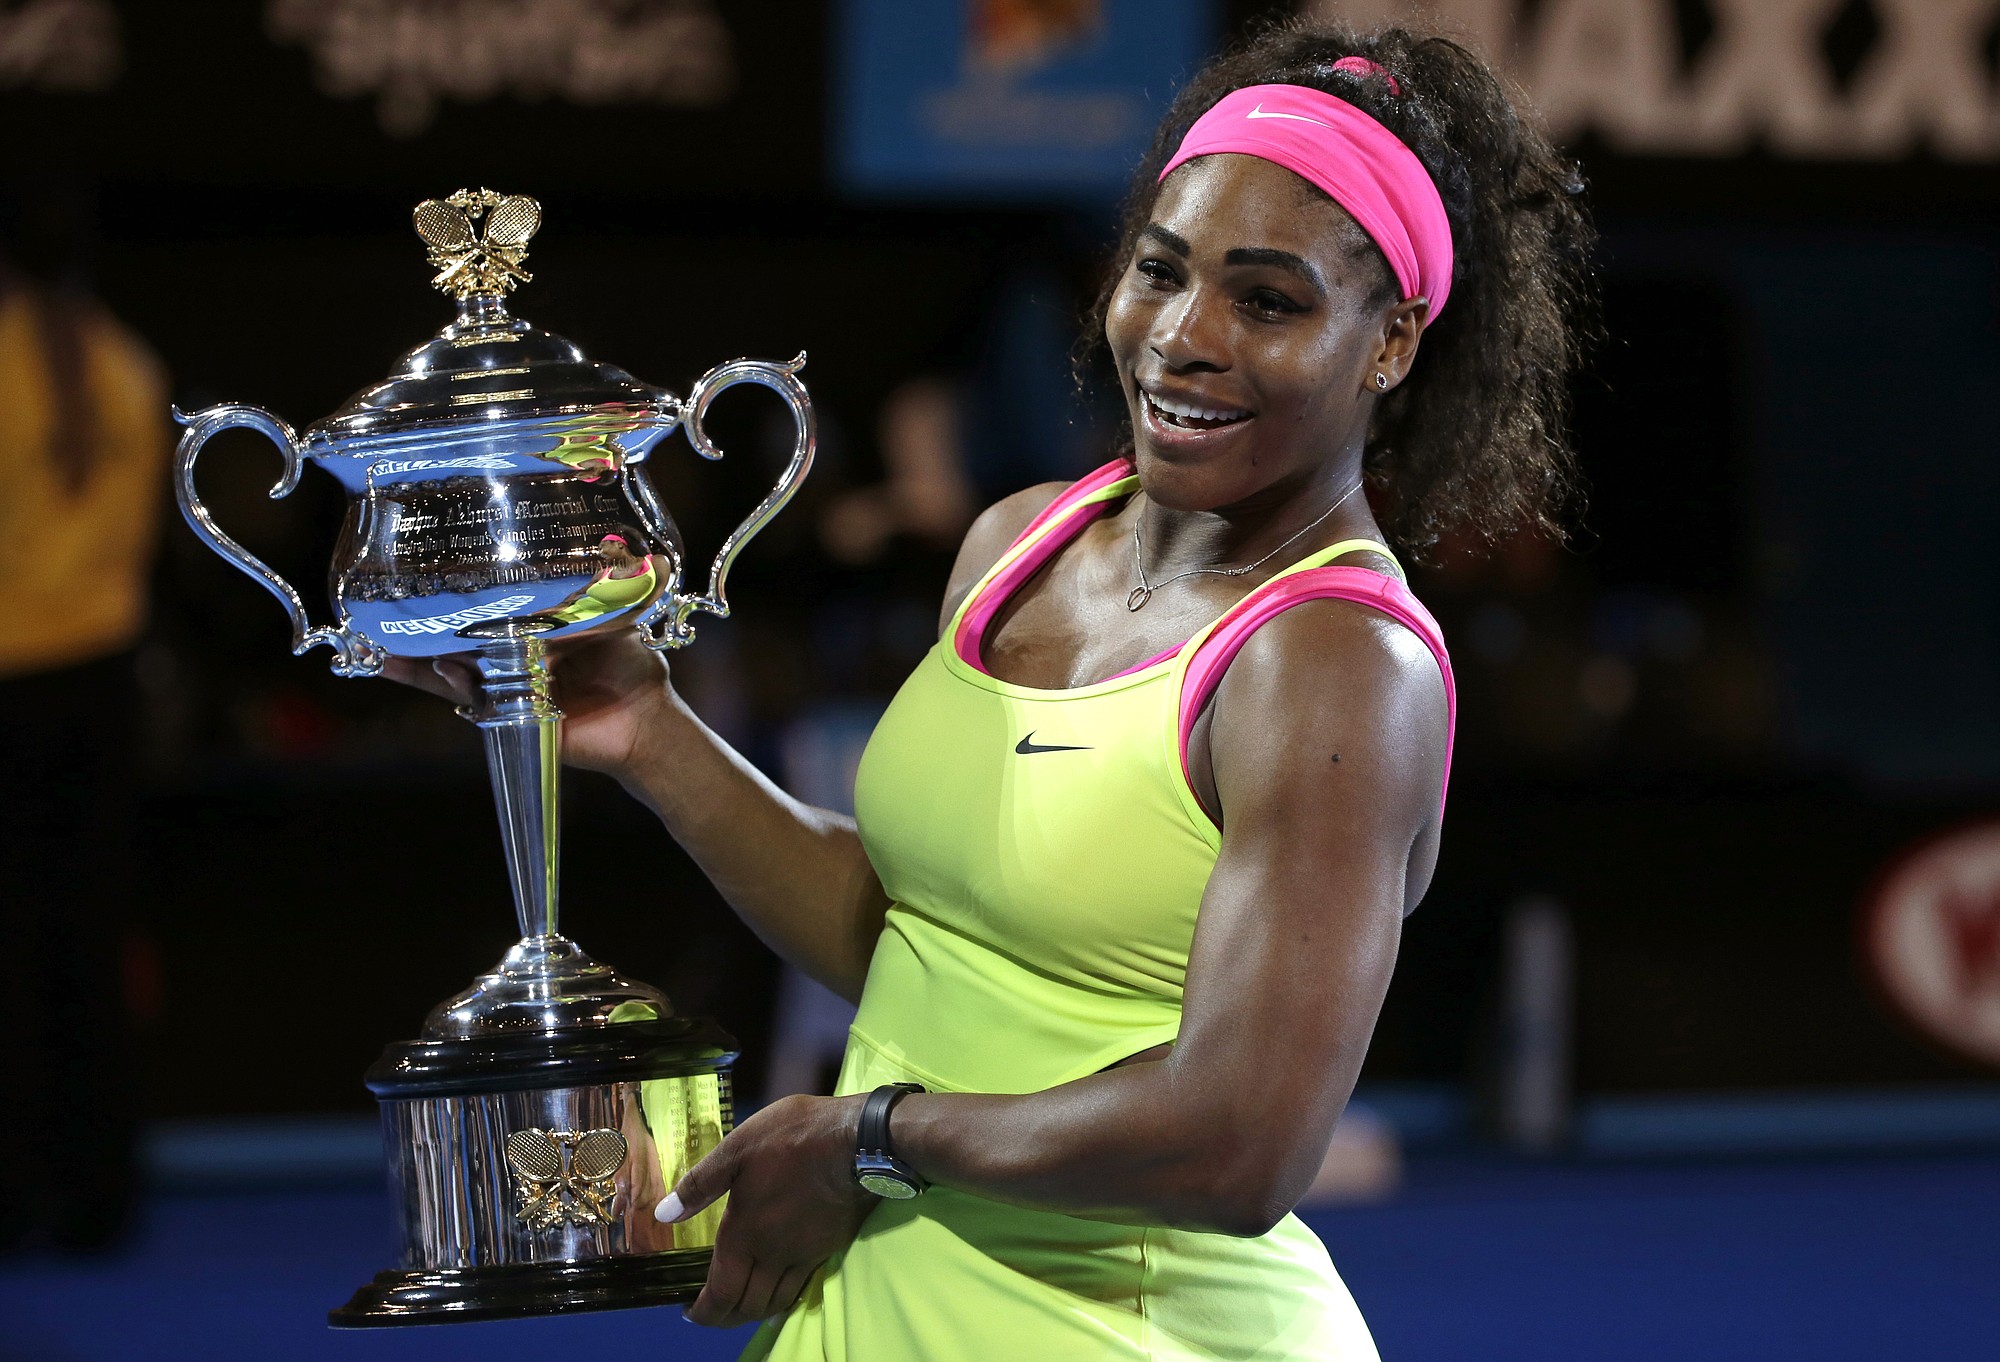 Serena Williams of the U.S. holds the trophy after defeating Maria Sharapova of Russia in the women's singles final at the Australian Open tennis championship in Melbourne, Australia, Saturday, Jan. 31, 2015.